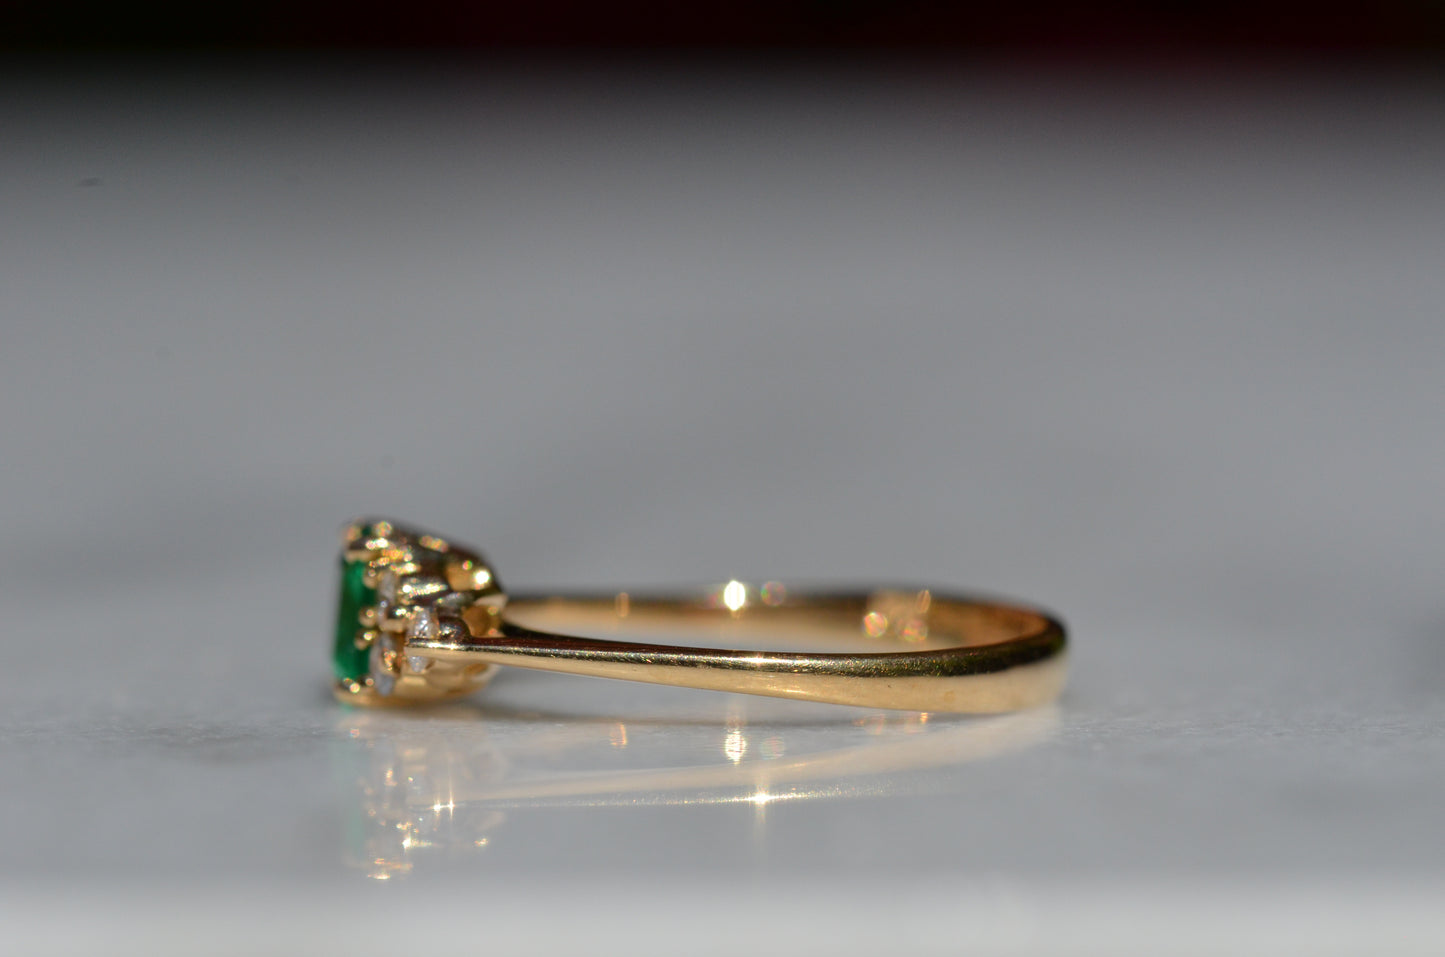 Close-cropped macro of a vintage ring, featuring a square emerald-cut emerald flanked by three round diamonds arranged in a triangular cluster on each shoulder. Viewed turned to the left to highlight the side of the band.